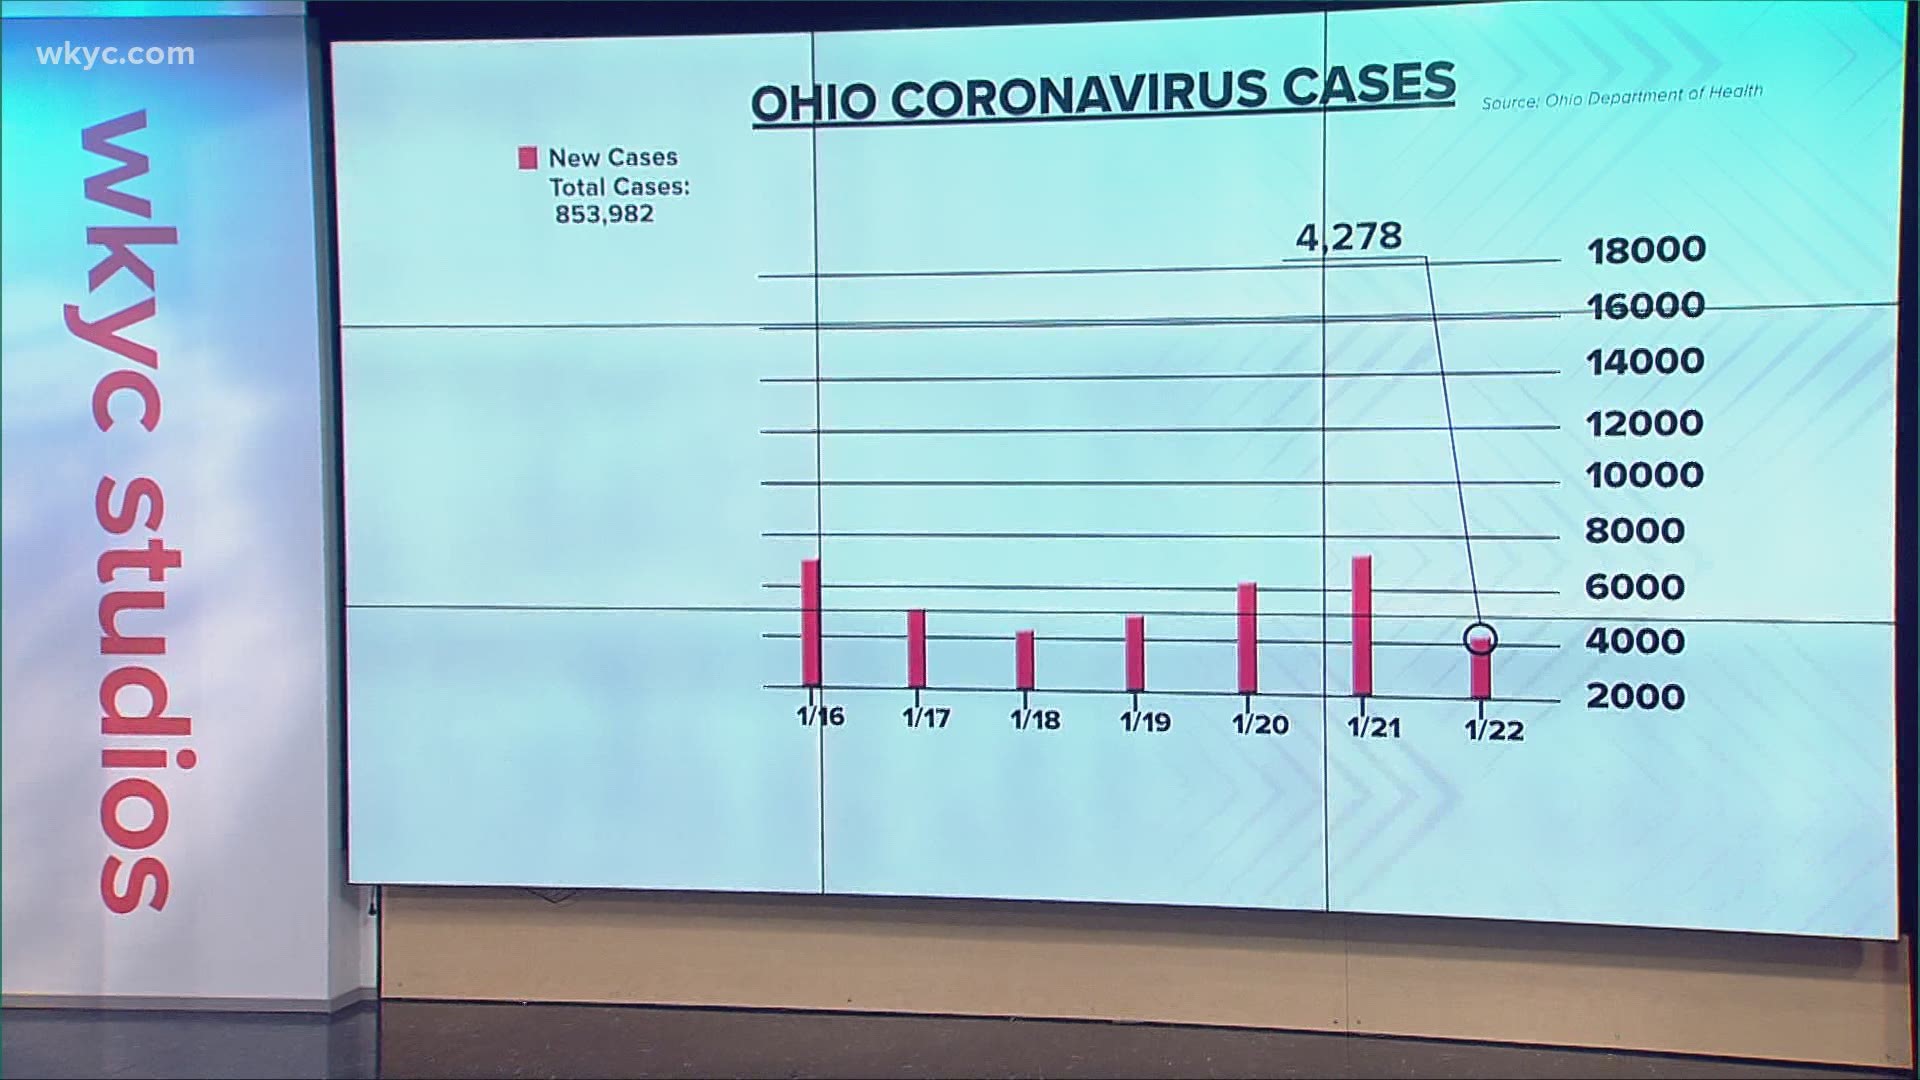 The number of COVID-19 cases dipped to 4,278 in the last 24 hours in Ohio. Several other key indicators showed declining numbers on Friday.